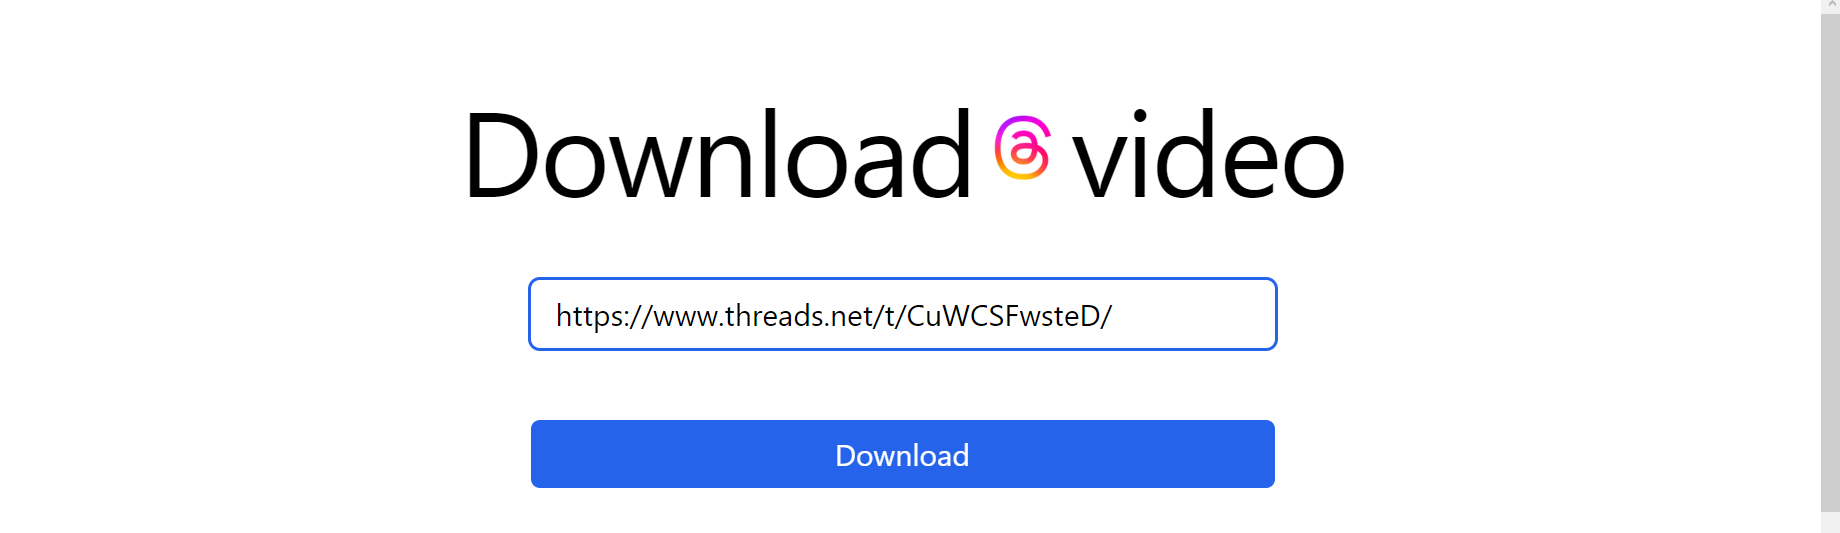 Paste the link on https://download-thread-video.dhr.wtf and click on the download button